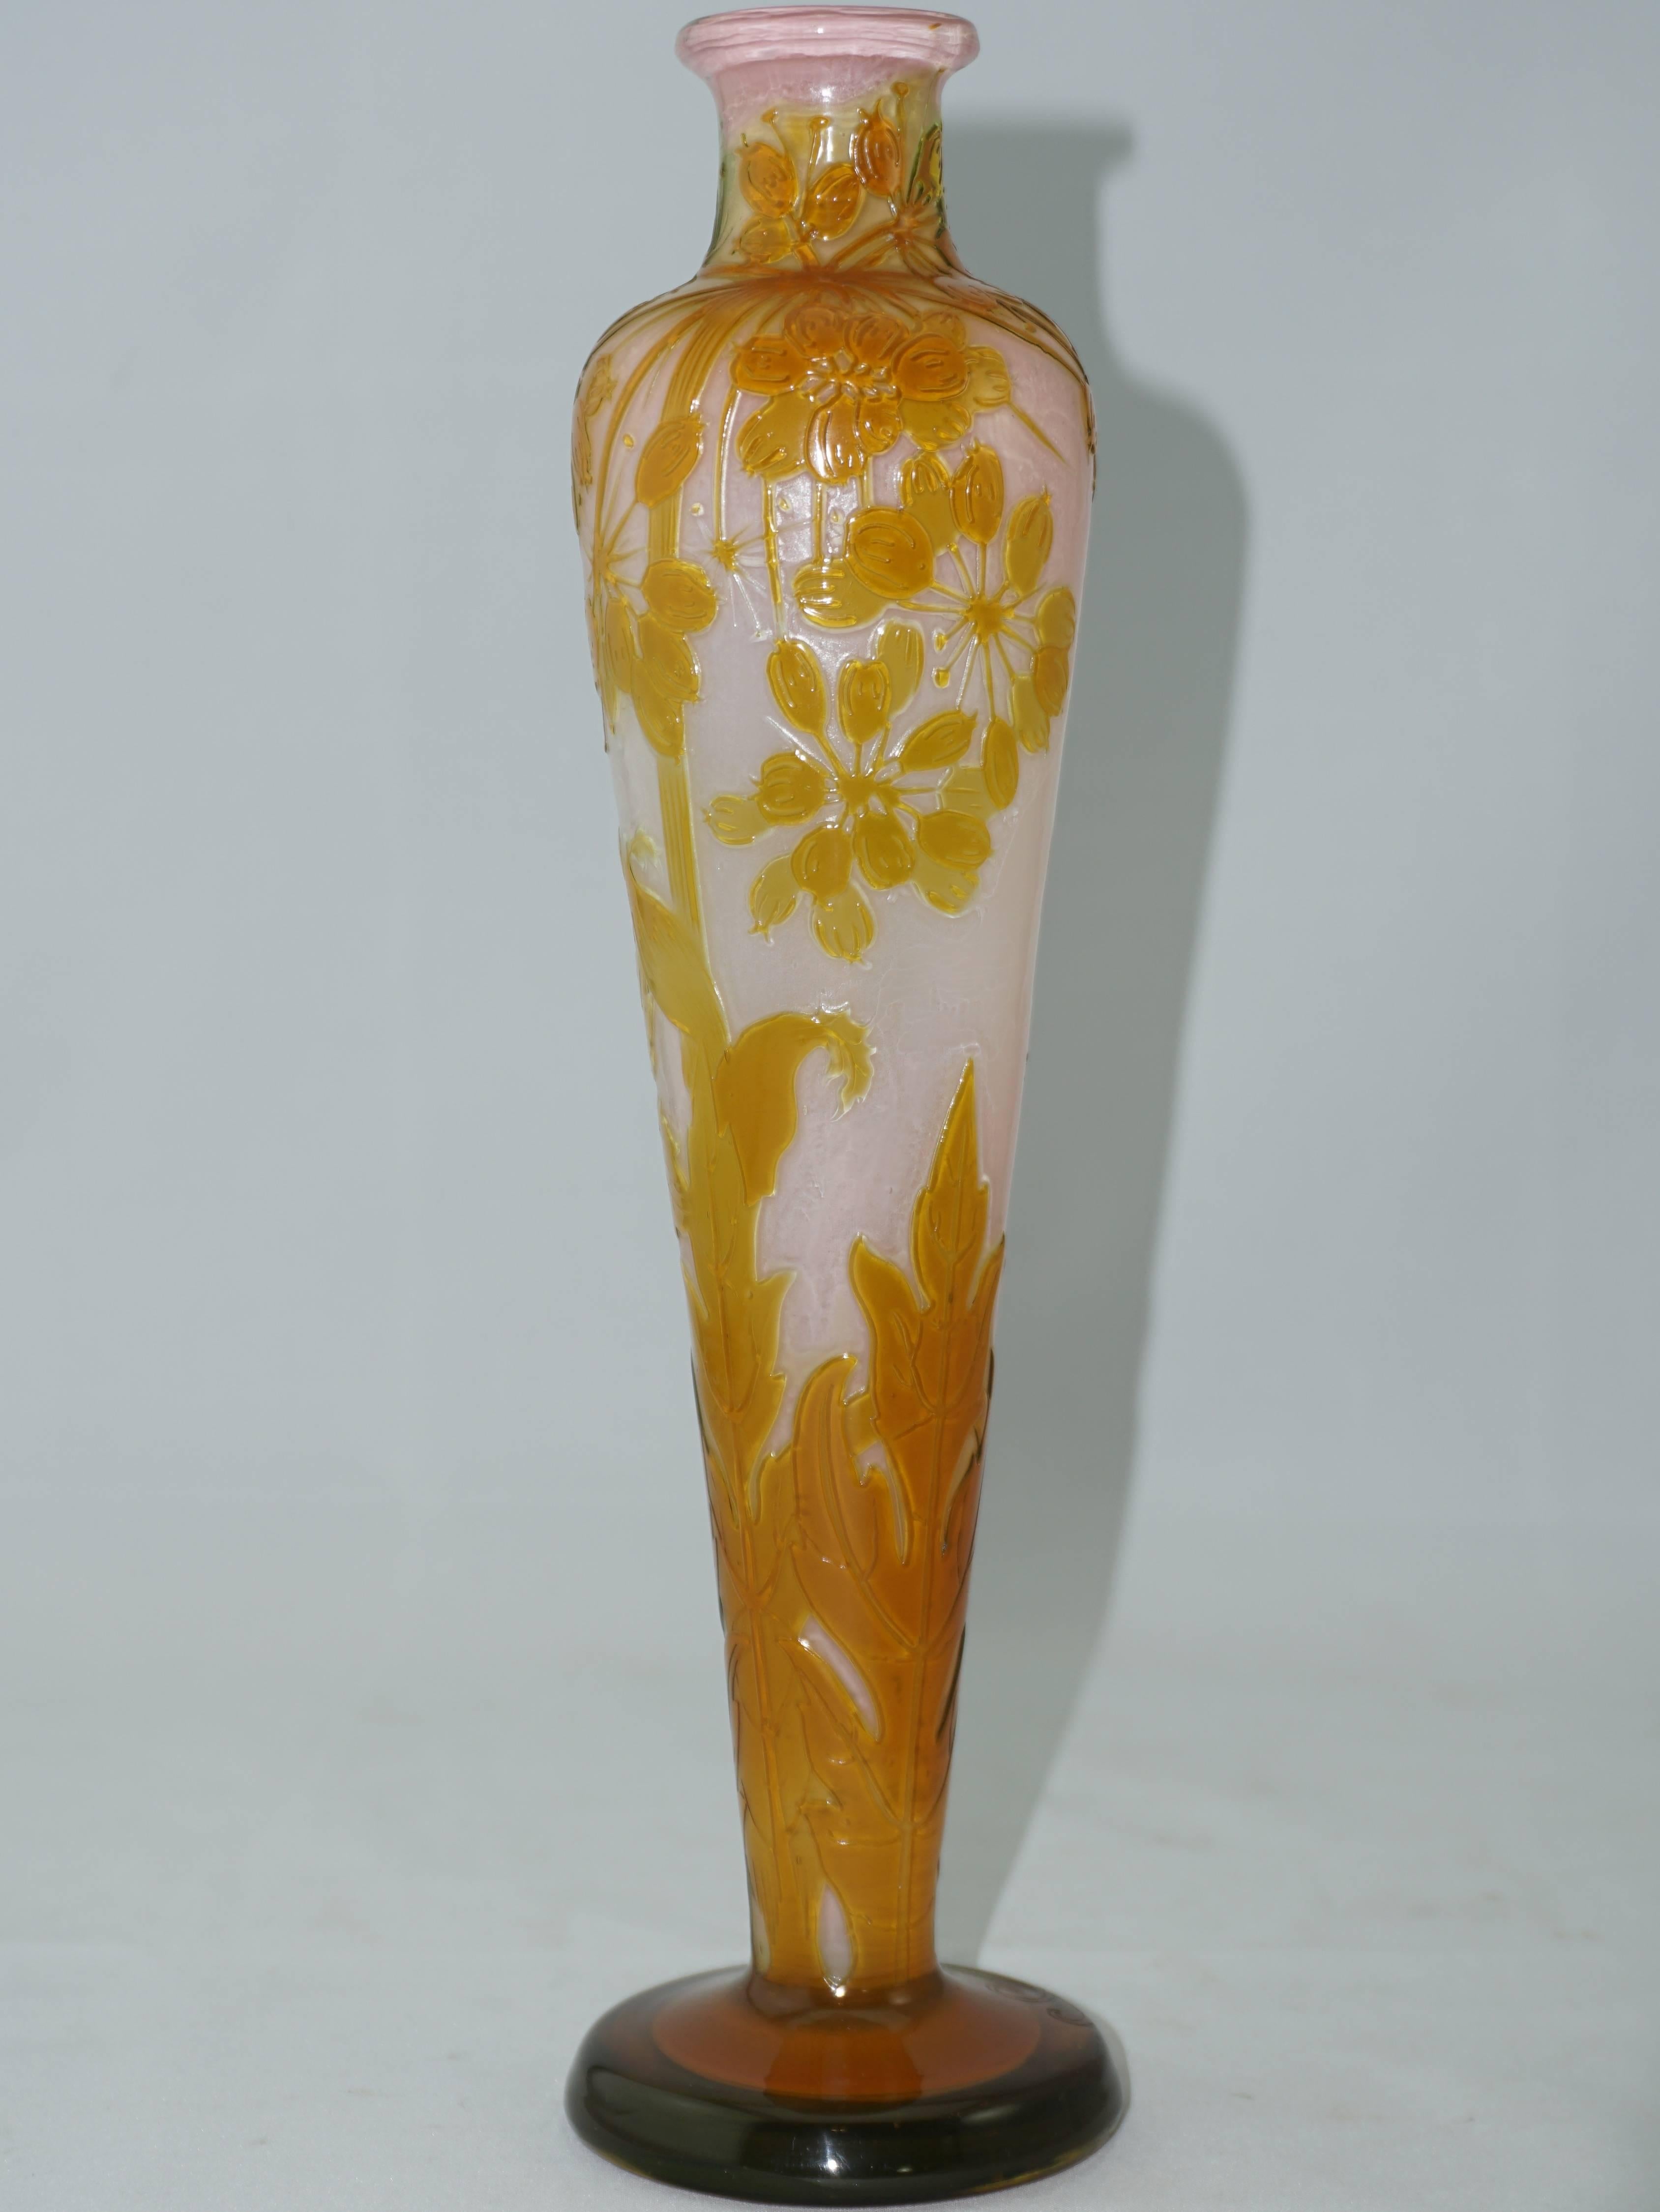 This tall and slender fire polished acid etched cameo vase is cased in a lovely pink and cream for a stunning effect of the wet look of fire polishing in the foreground. Orange and yellows dominate the foreground with etched leaves and seeding